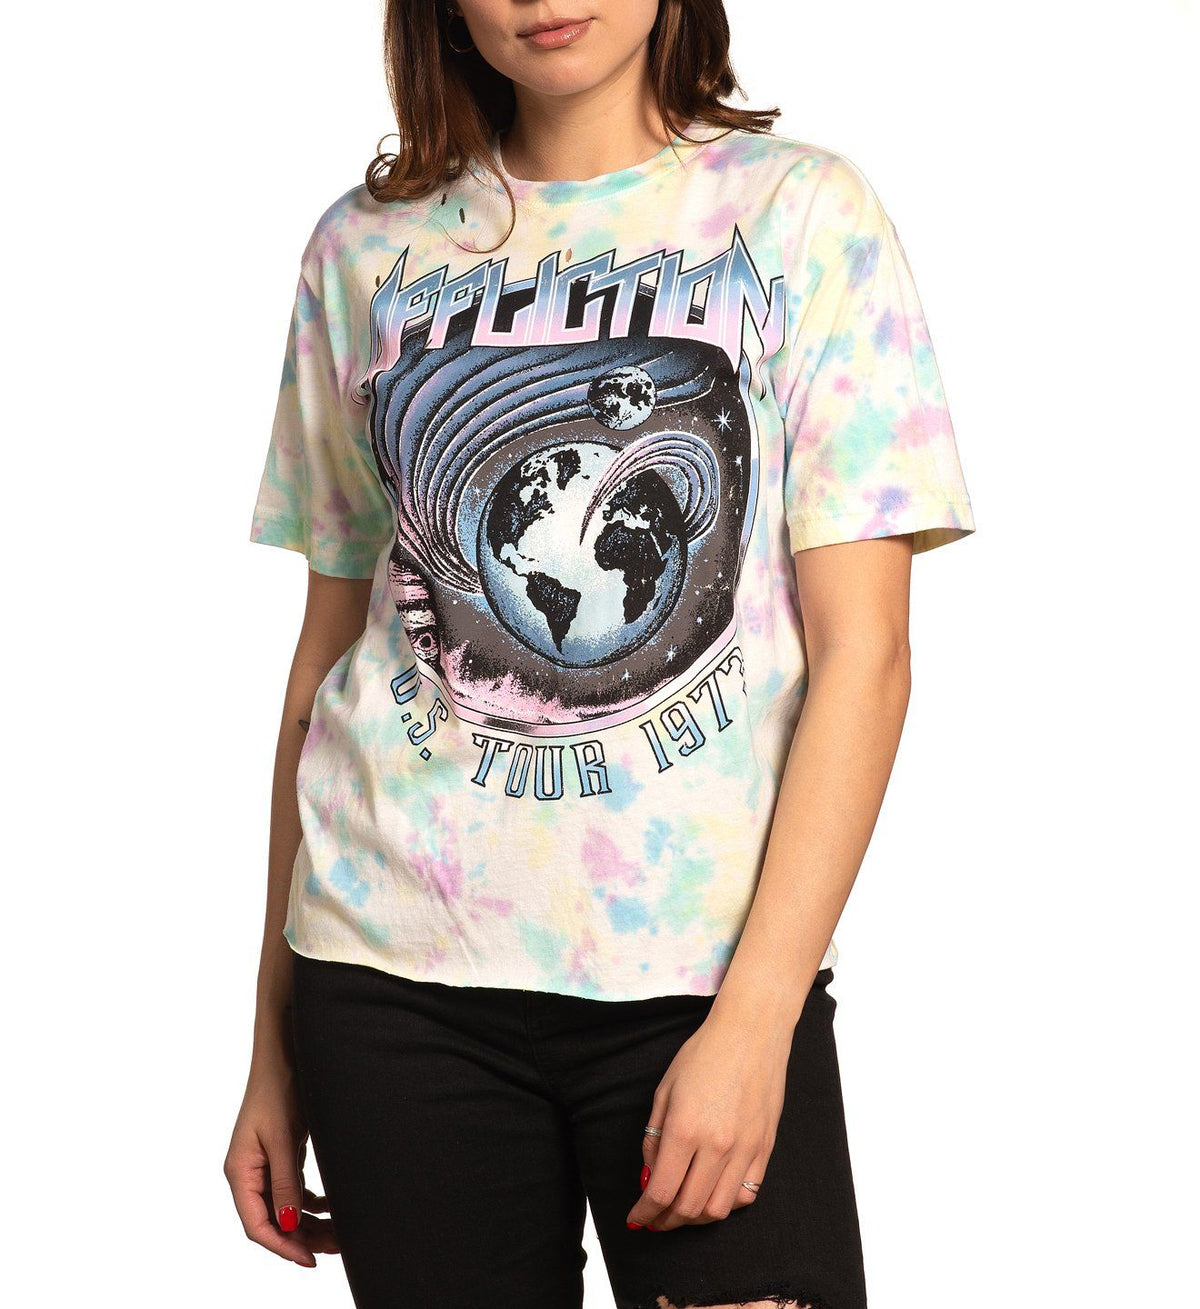 Space Rock - Affliction Clothing